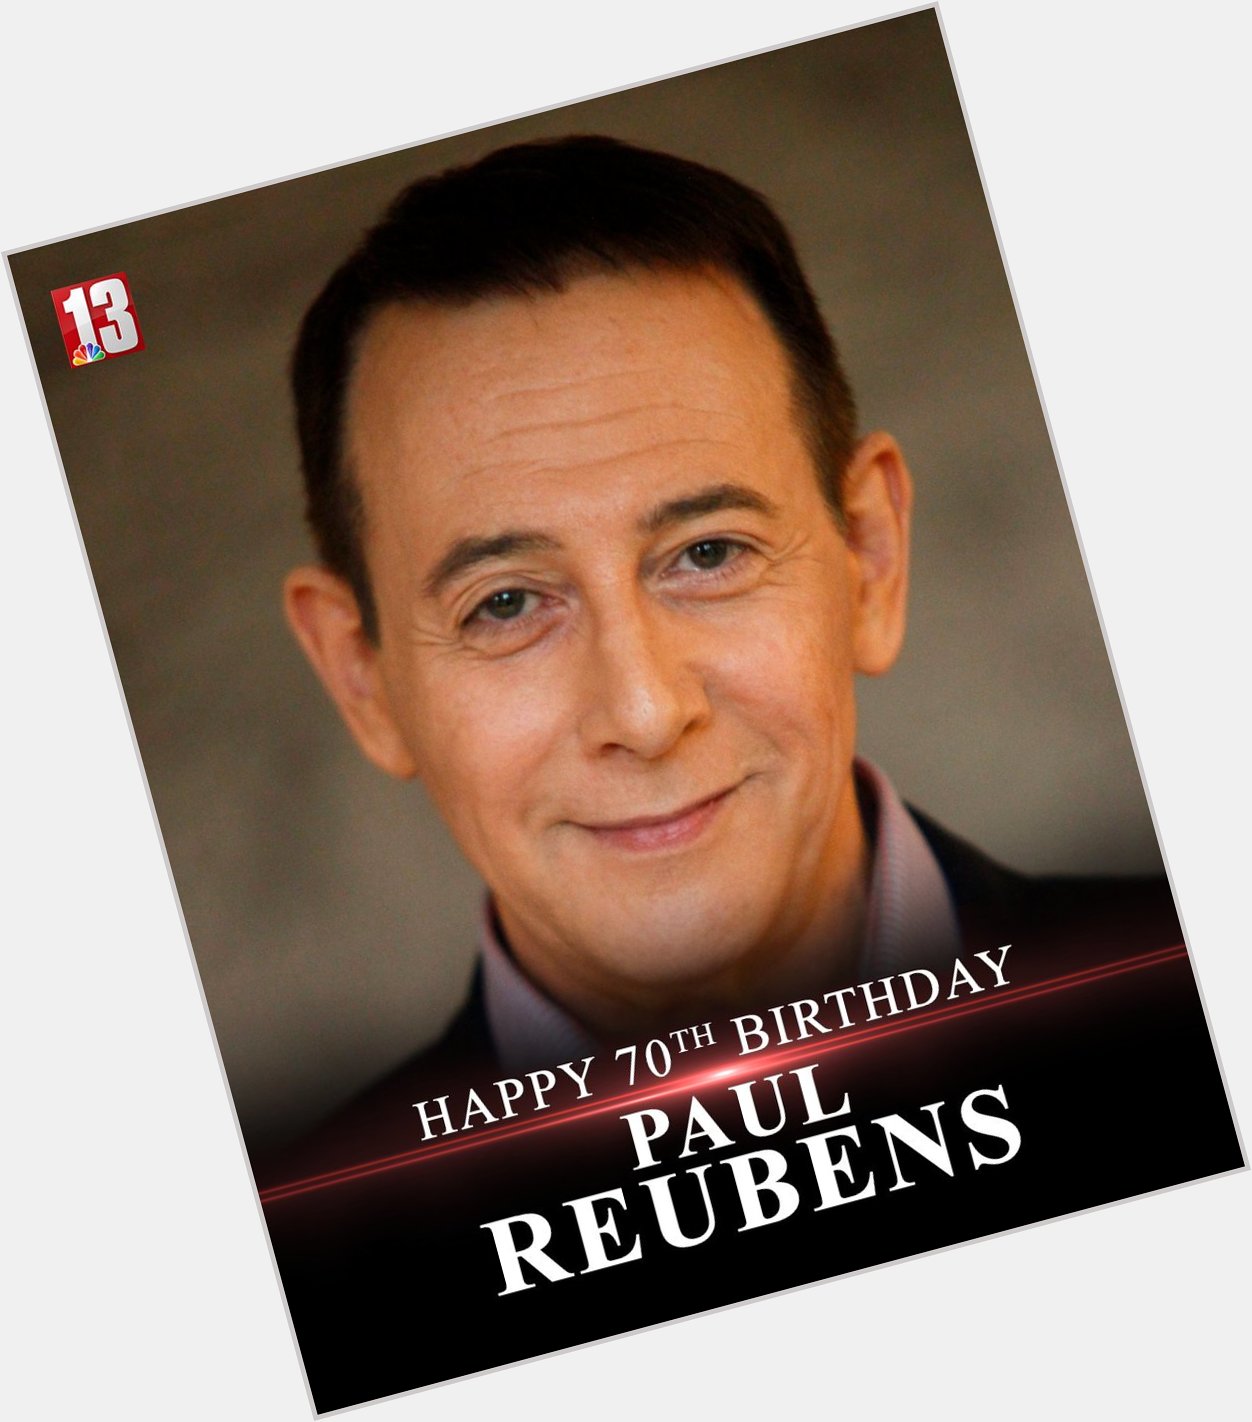   Today\s secret word is BIRTHDAY! Happy 70th to Paul Reubens, a.k.a. 